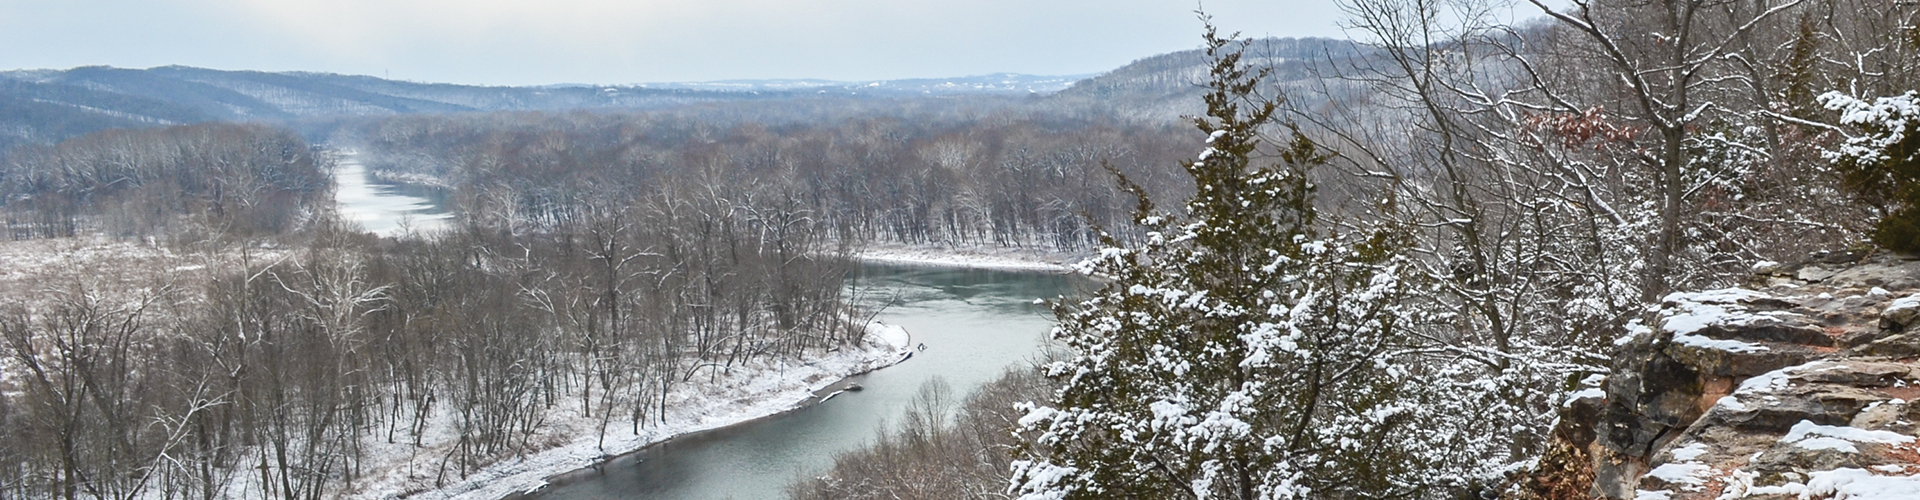 The Meramec River winding through snow-covered Castlewood State Park.